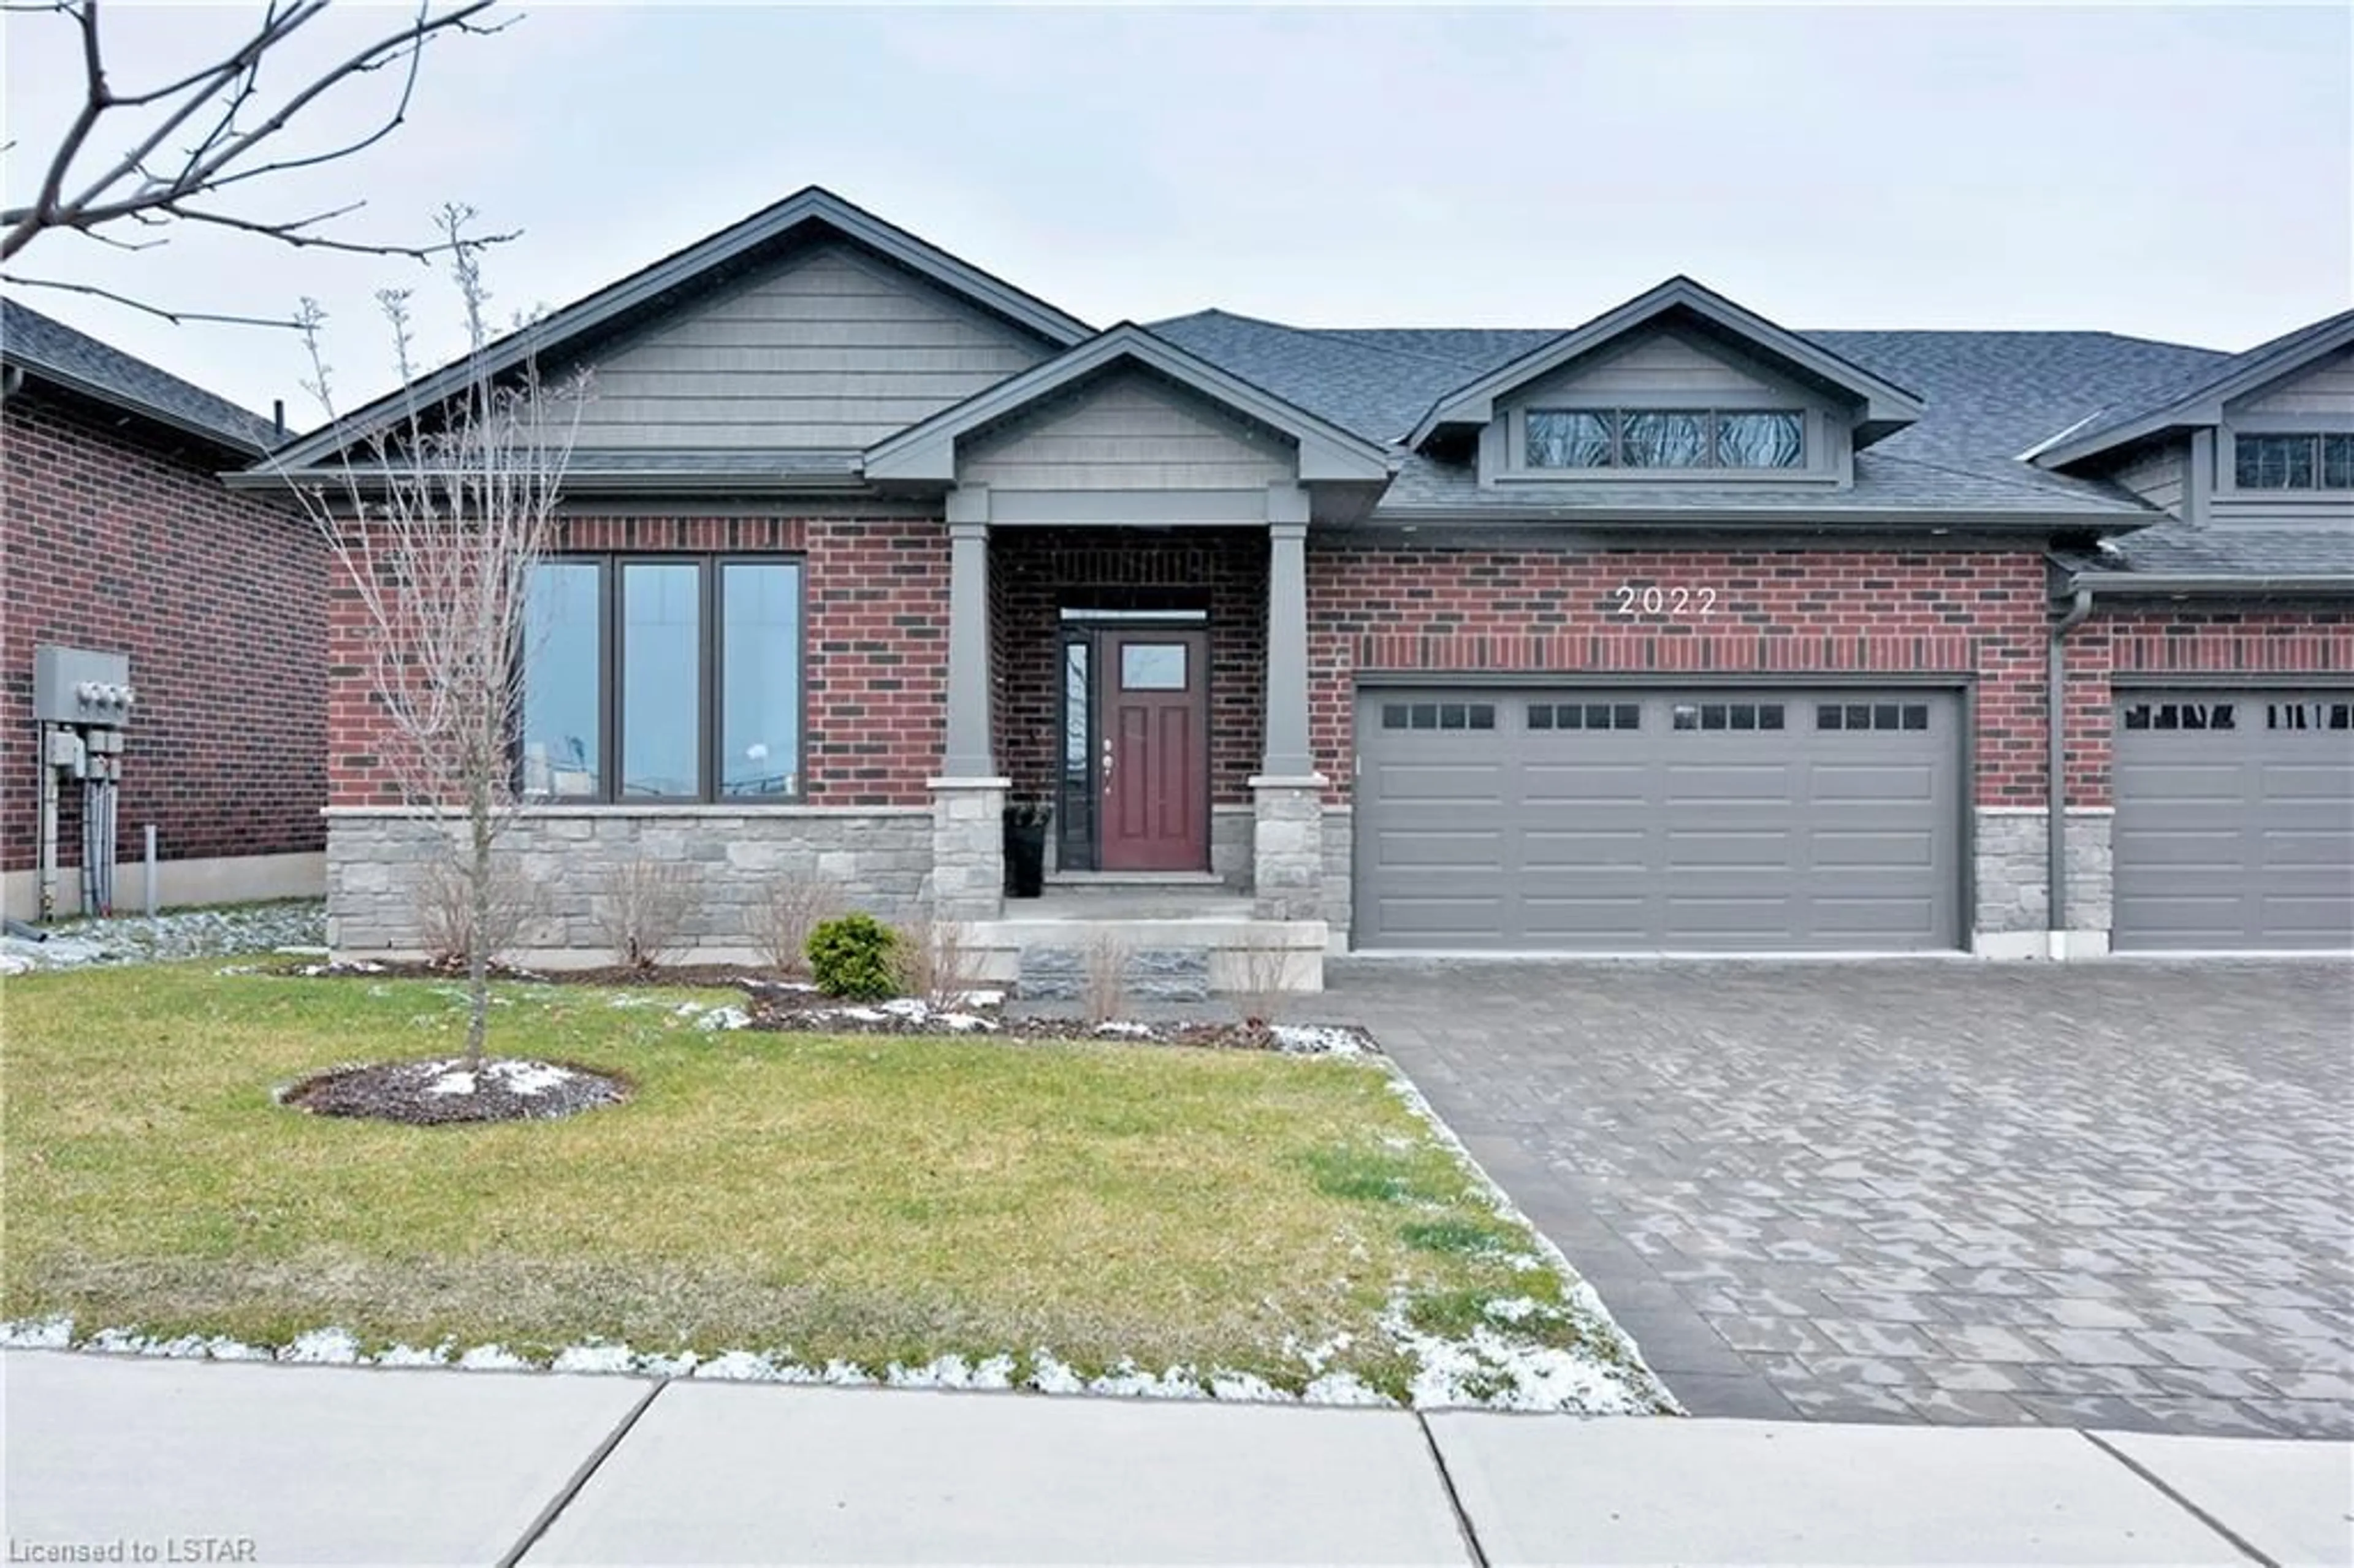 Home with brick exterior material for 2022 Upperpoint Boulevard #10, London Ontario N6K 4M9